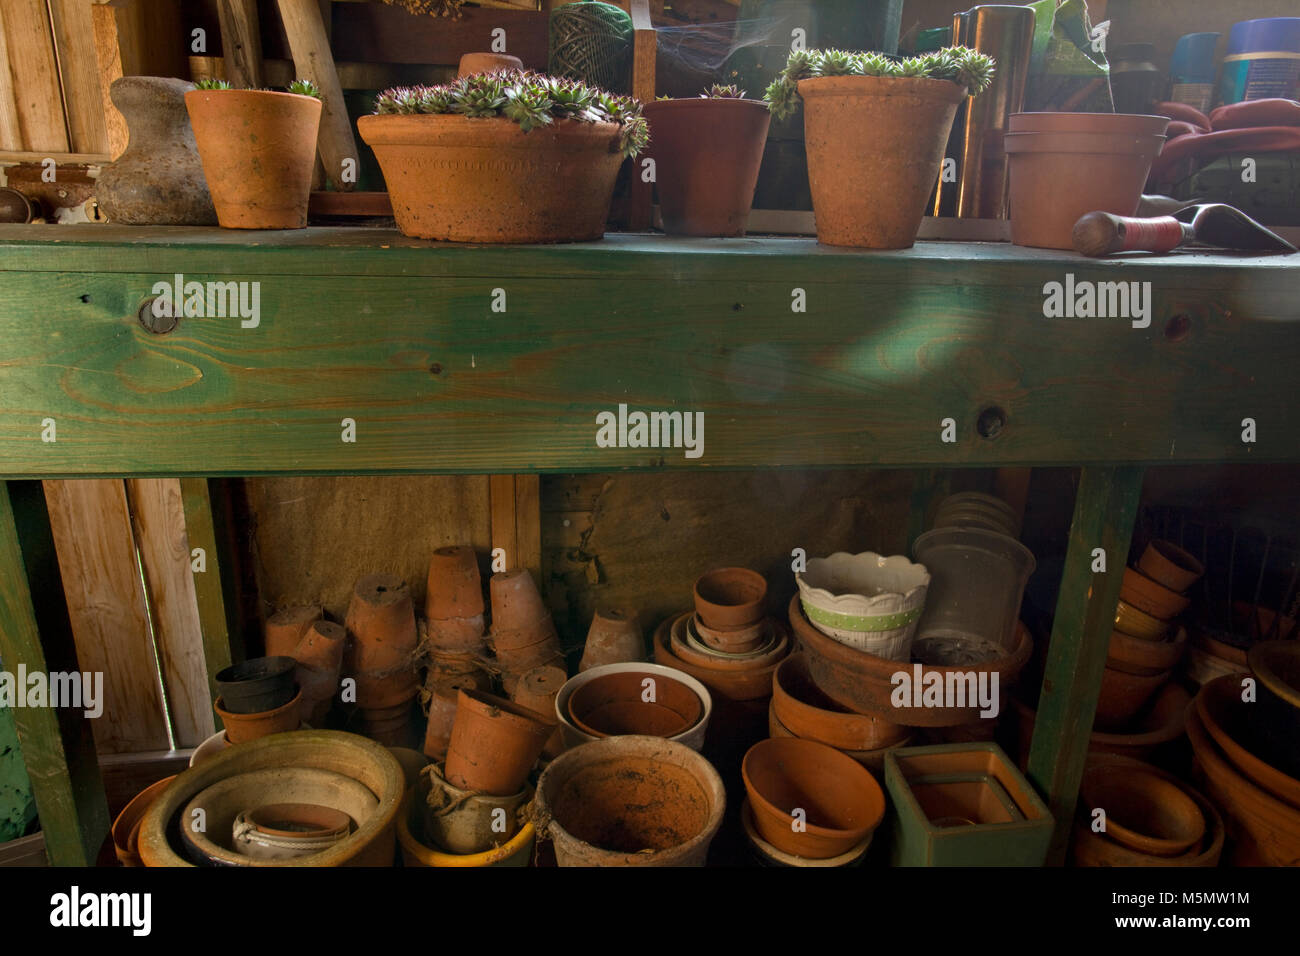 Interior of garden shed with terracotta plant pots and plants Stock Photo